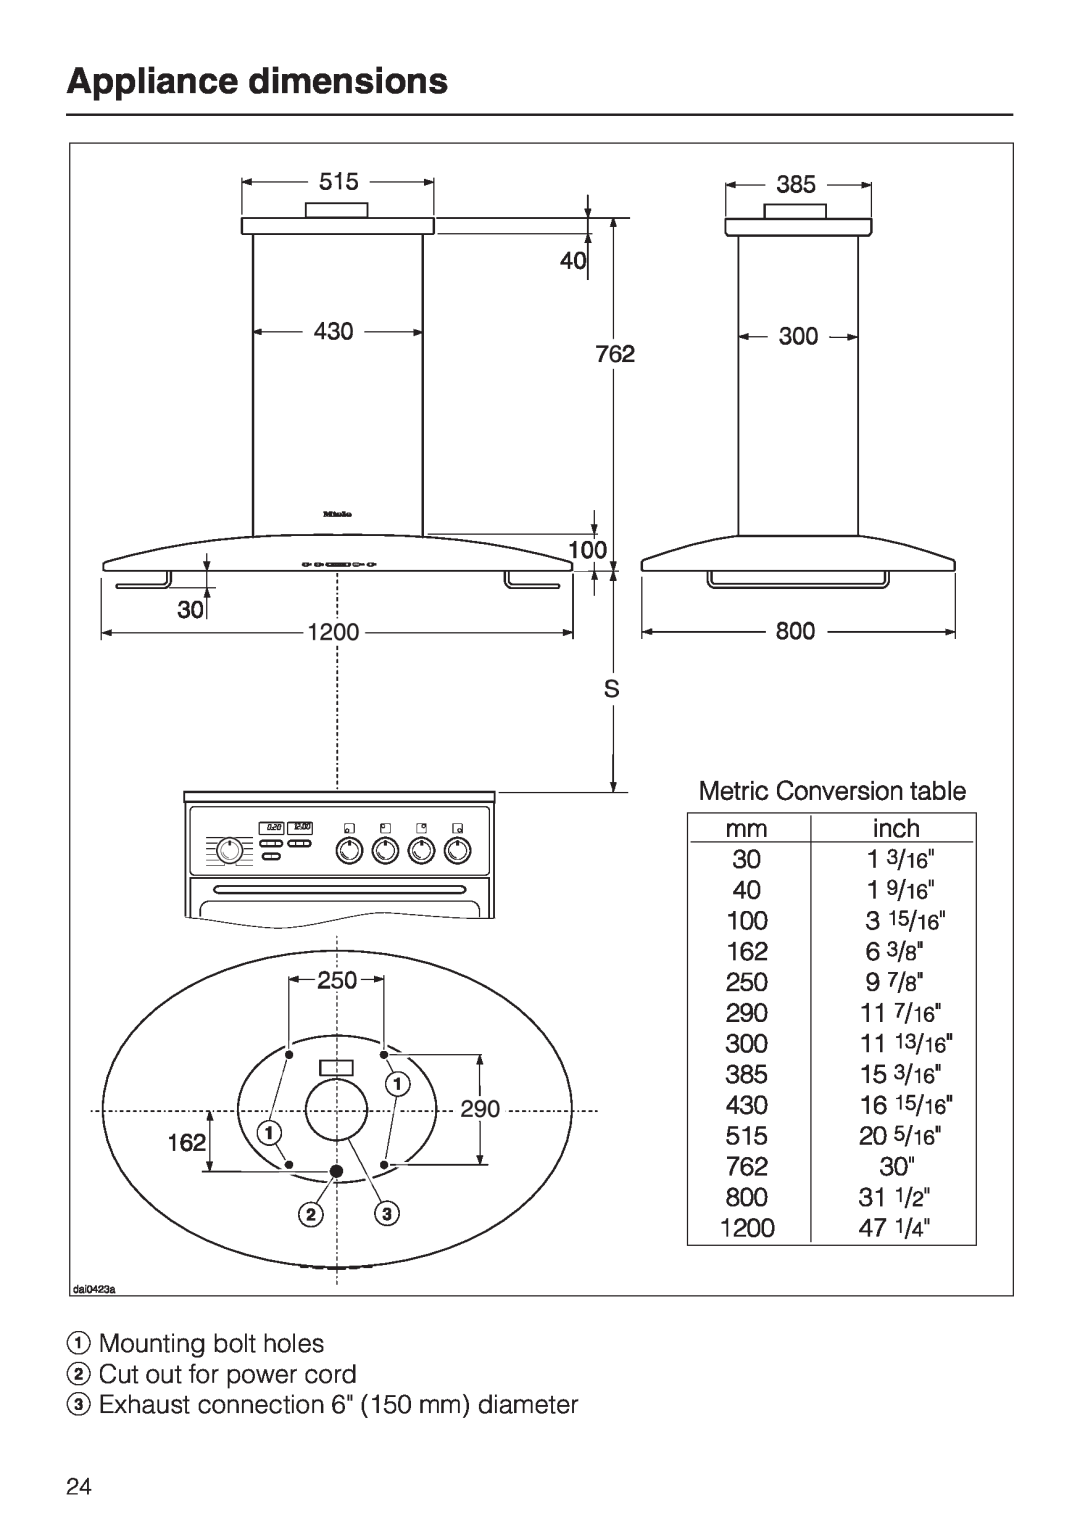 Miele DA 230-3 Appliance dimensions, aMounting bolt holes b Cut out for power cord, c Exhaust connection 6 150 mm diameter 